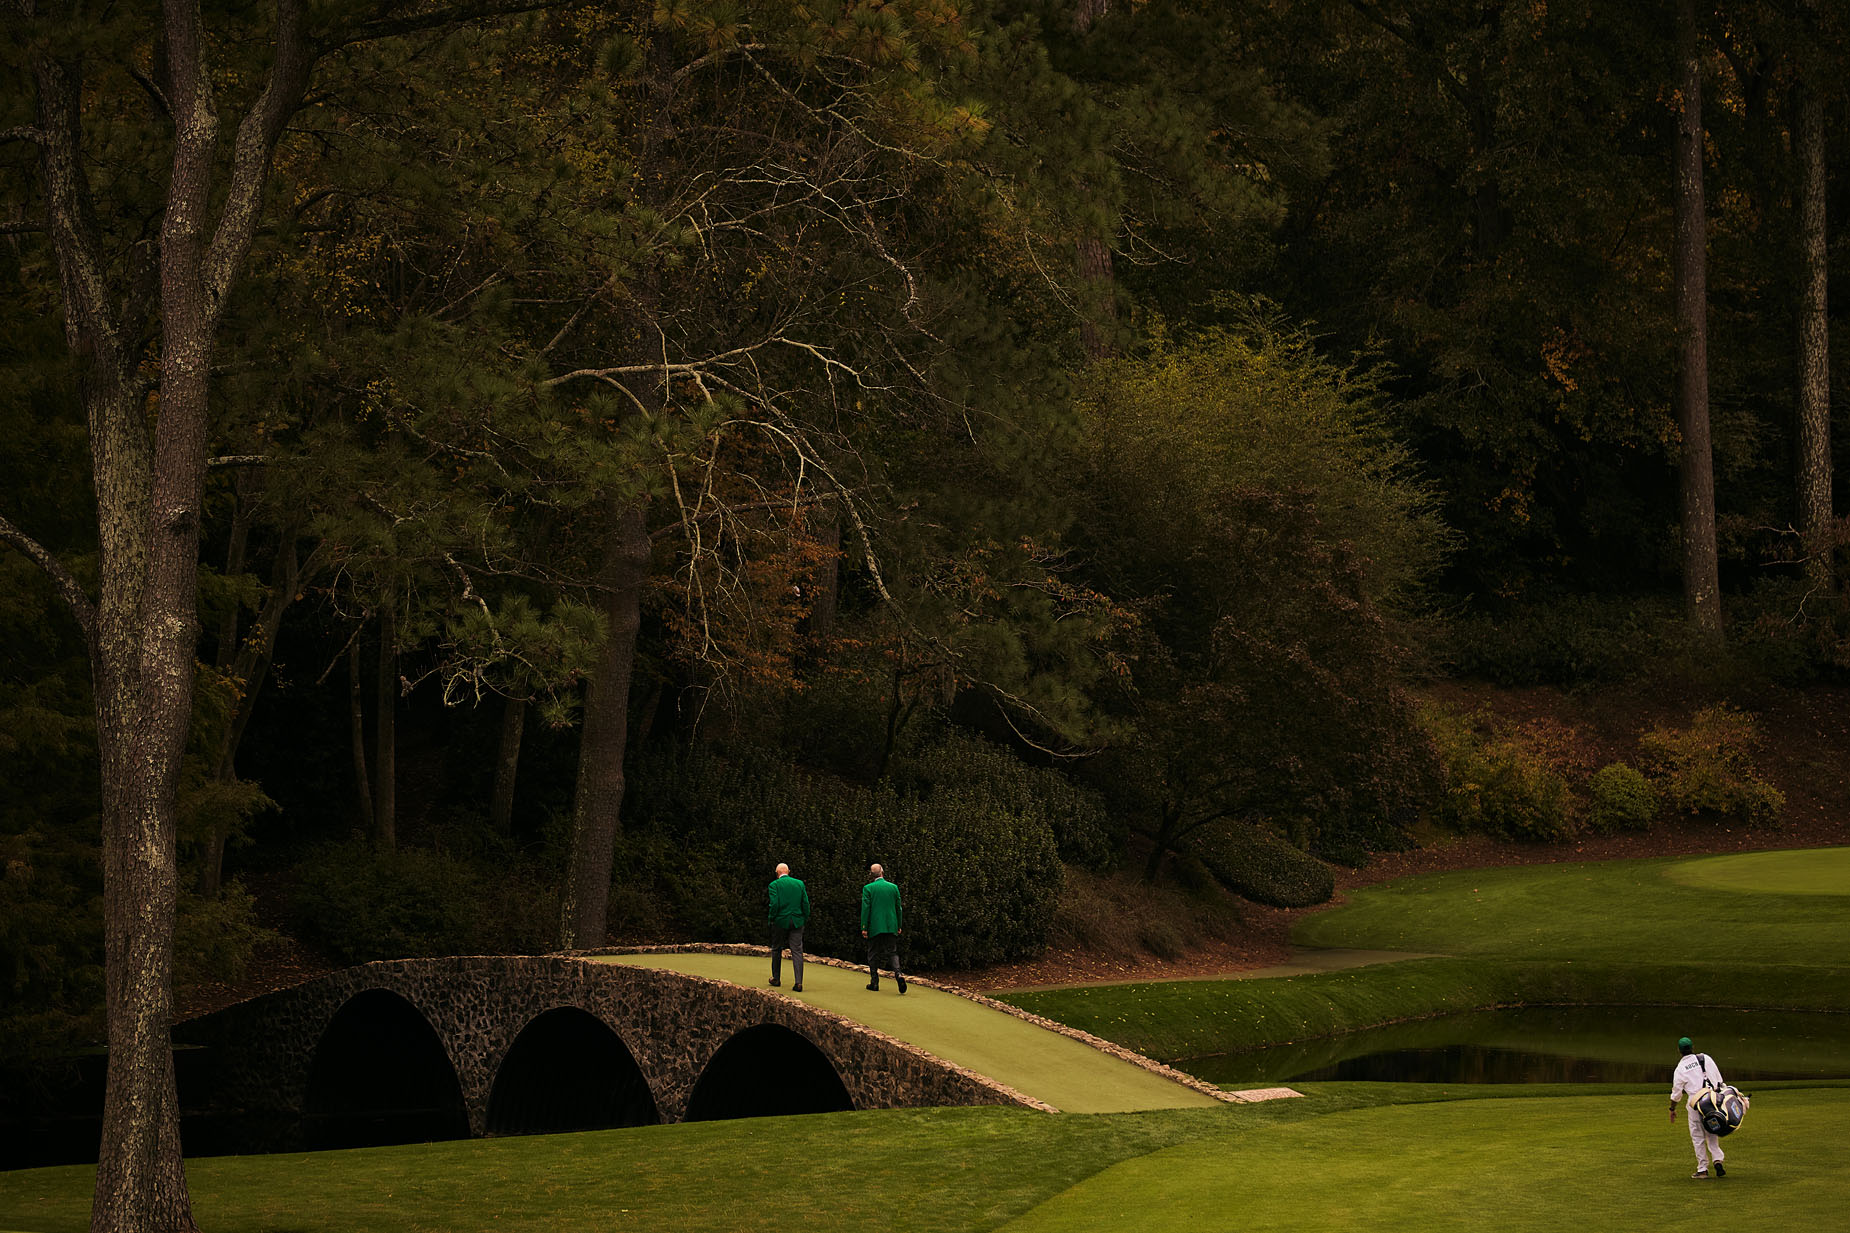 The 2020 Masters - Golf Magazine - Stephen Denton Photography - Los Angeles, CA Commercial Photographer